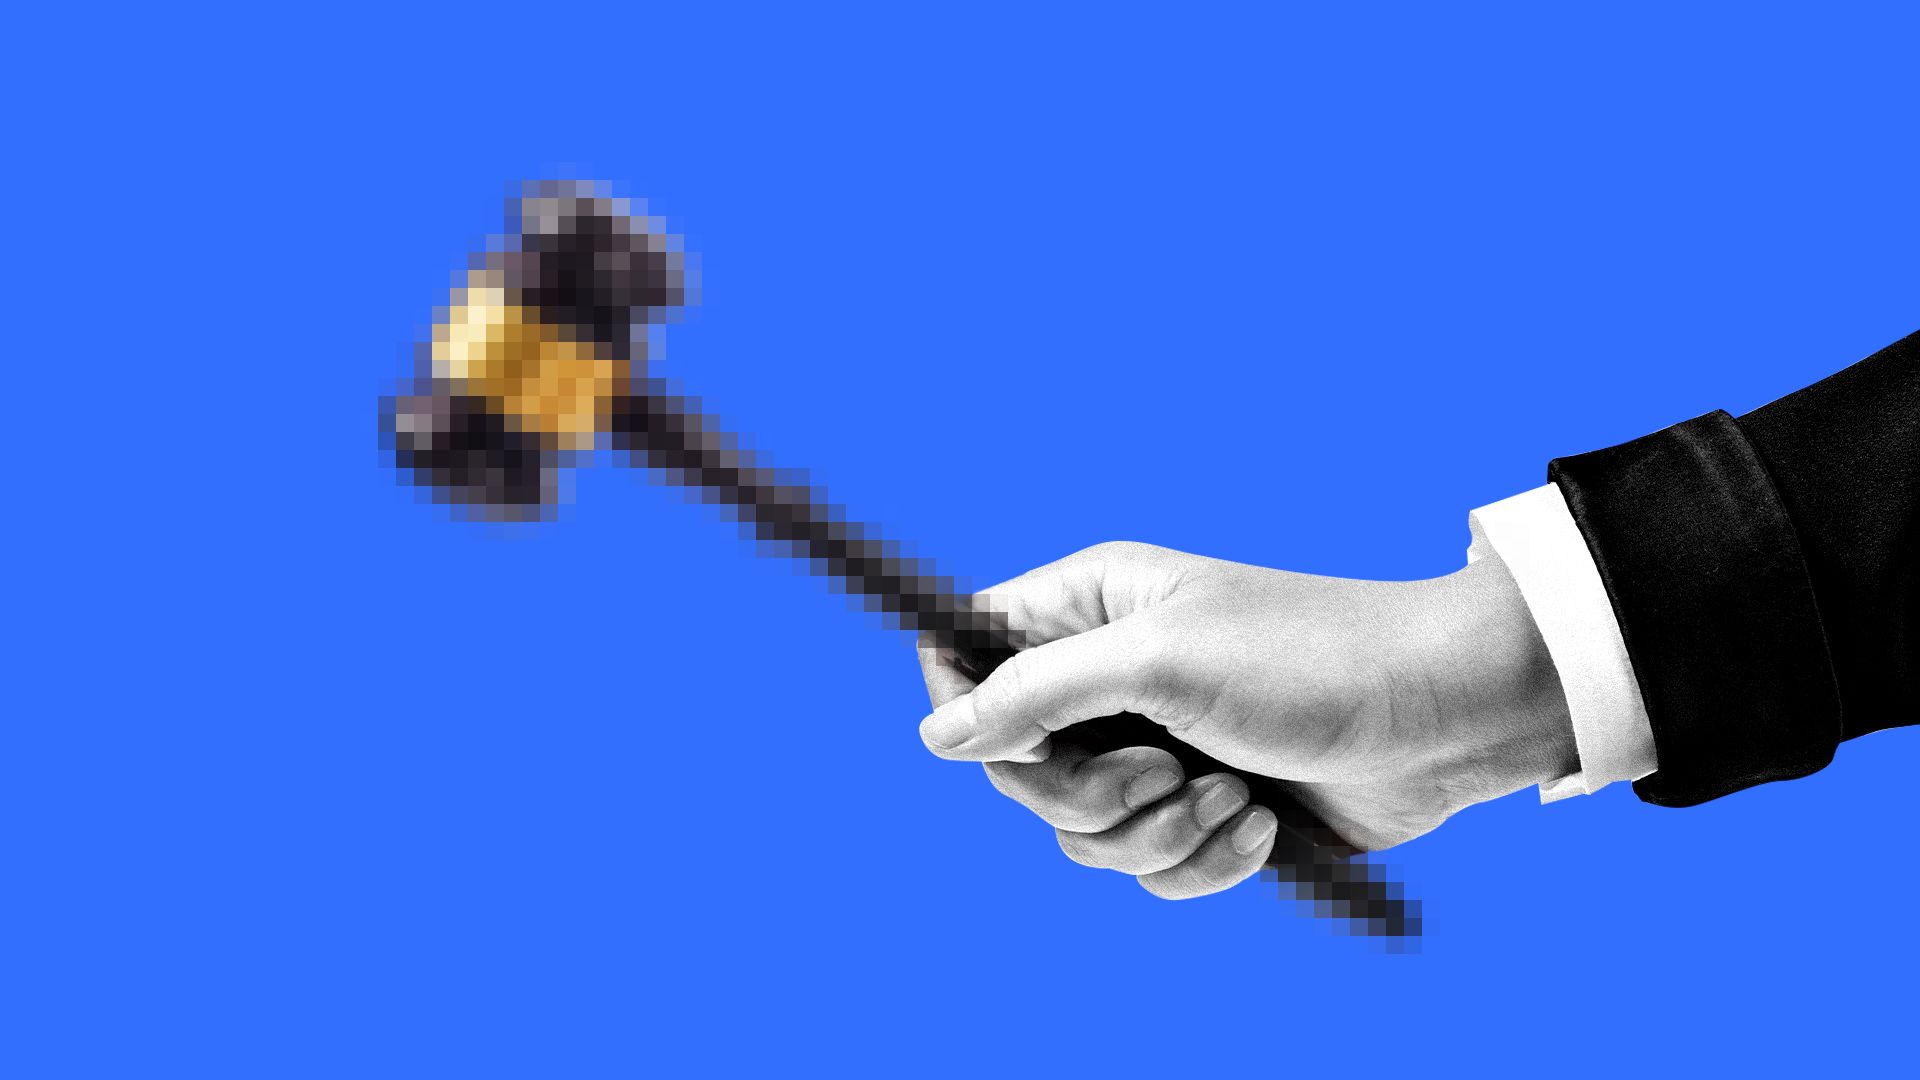 Illustration of a hand holding a pixelated gavel.